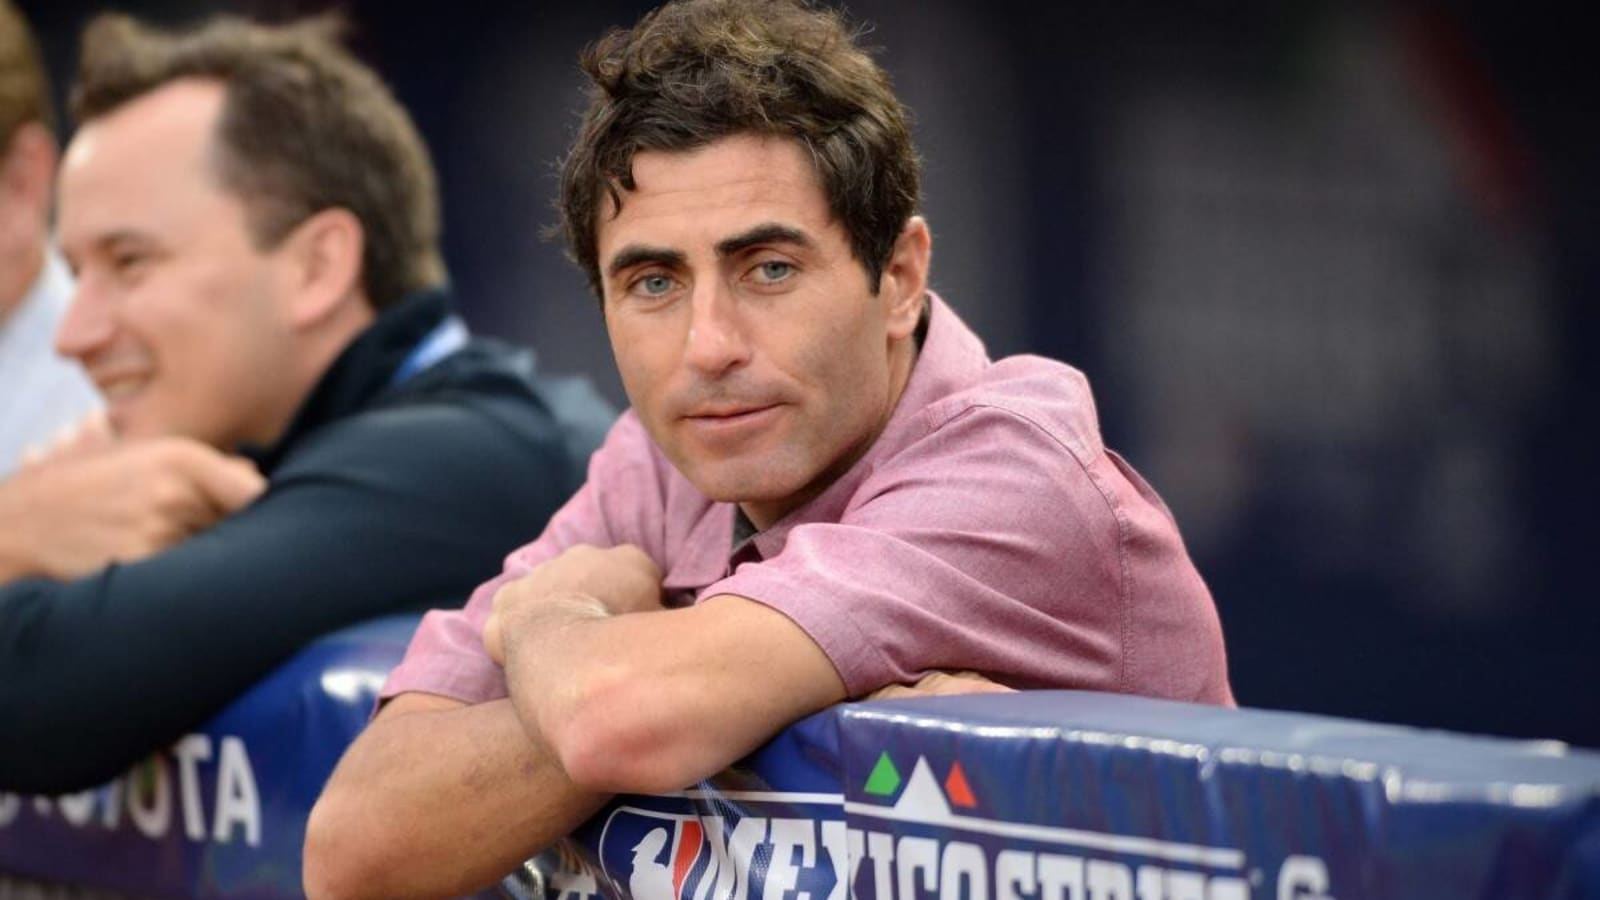 Padres Looking to Upgrade at 2 Positions Via Trade, Says GM AJ Preller